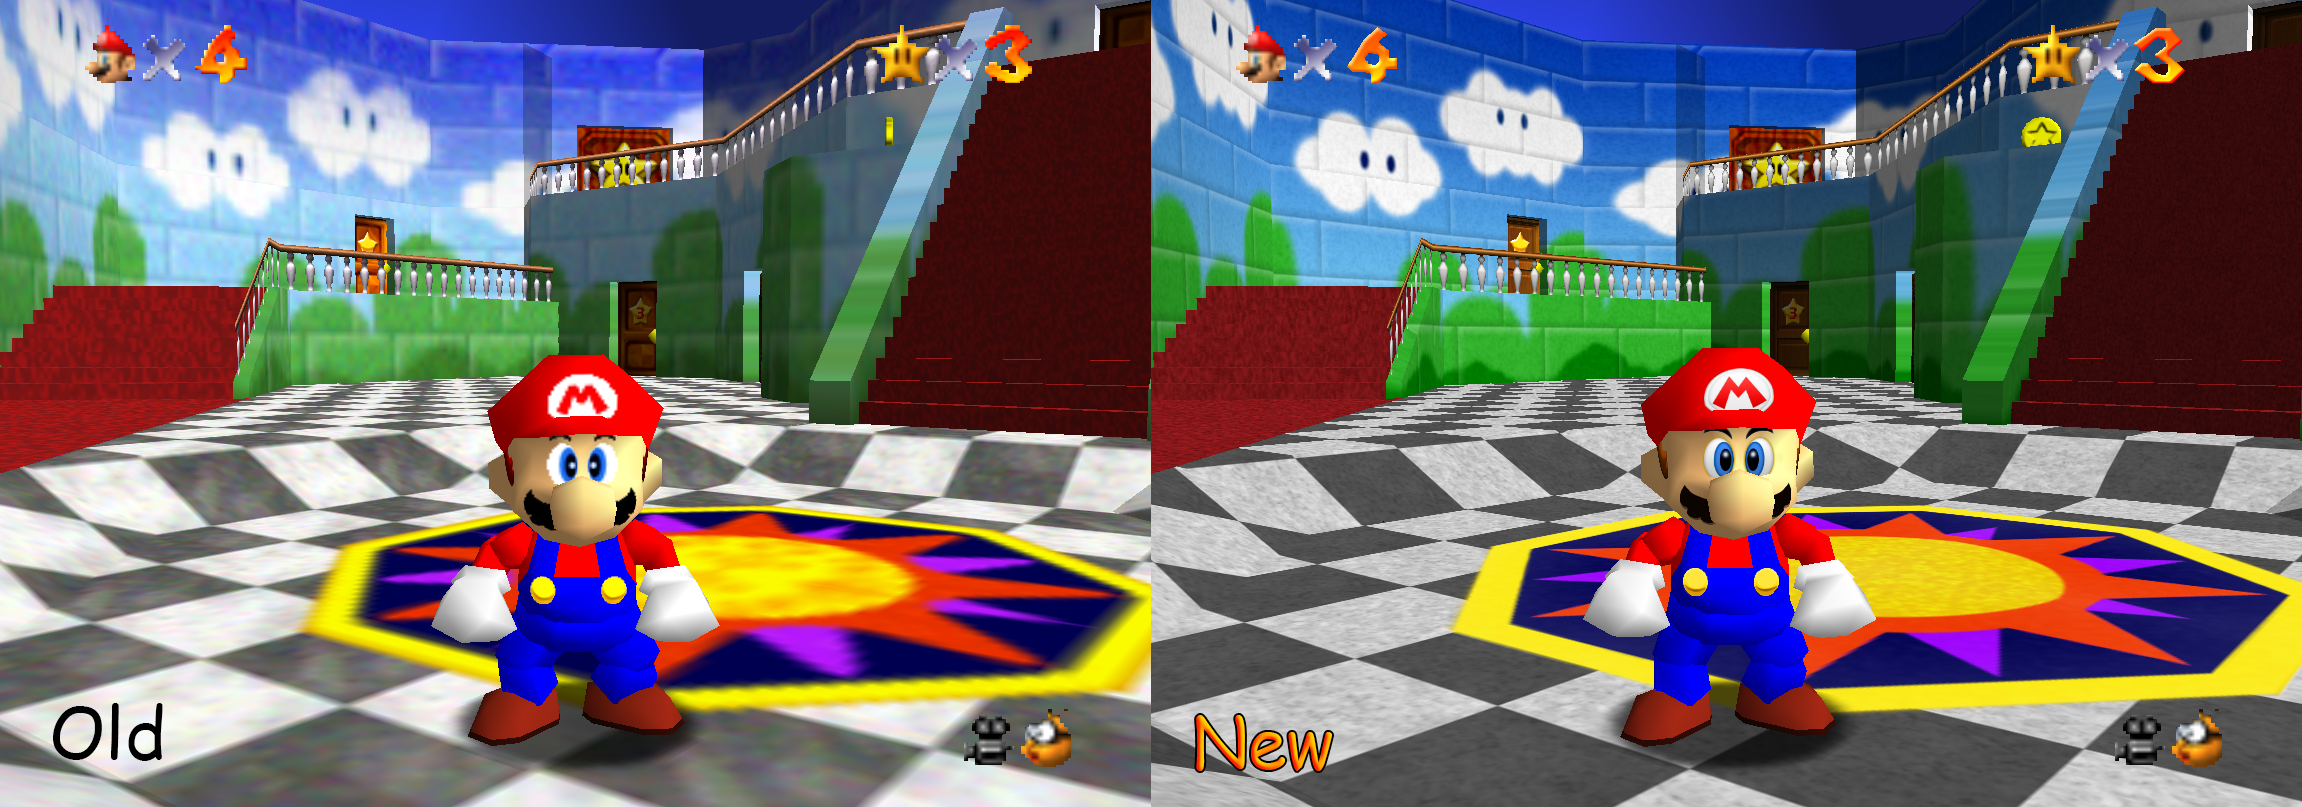 Super Mario 64 High Resolution Texture Pack by myownfriend on ...